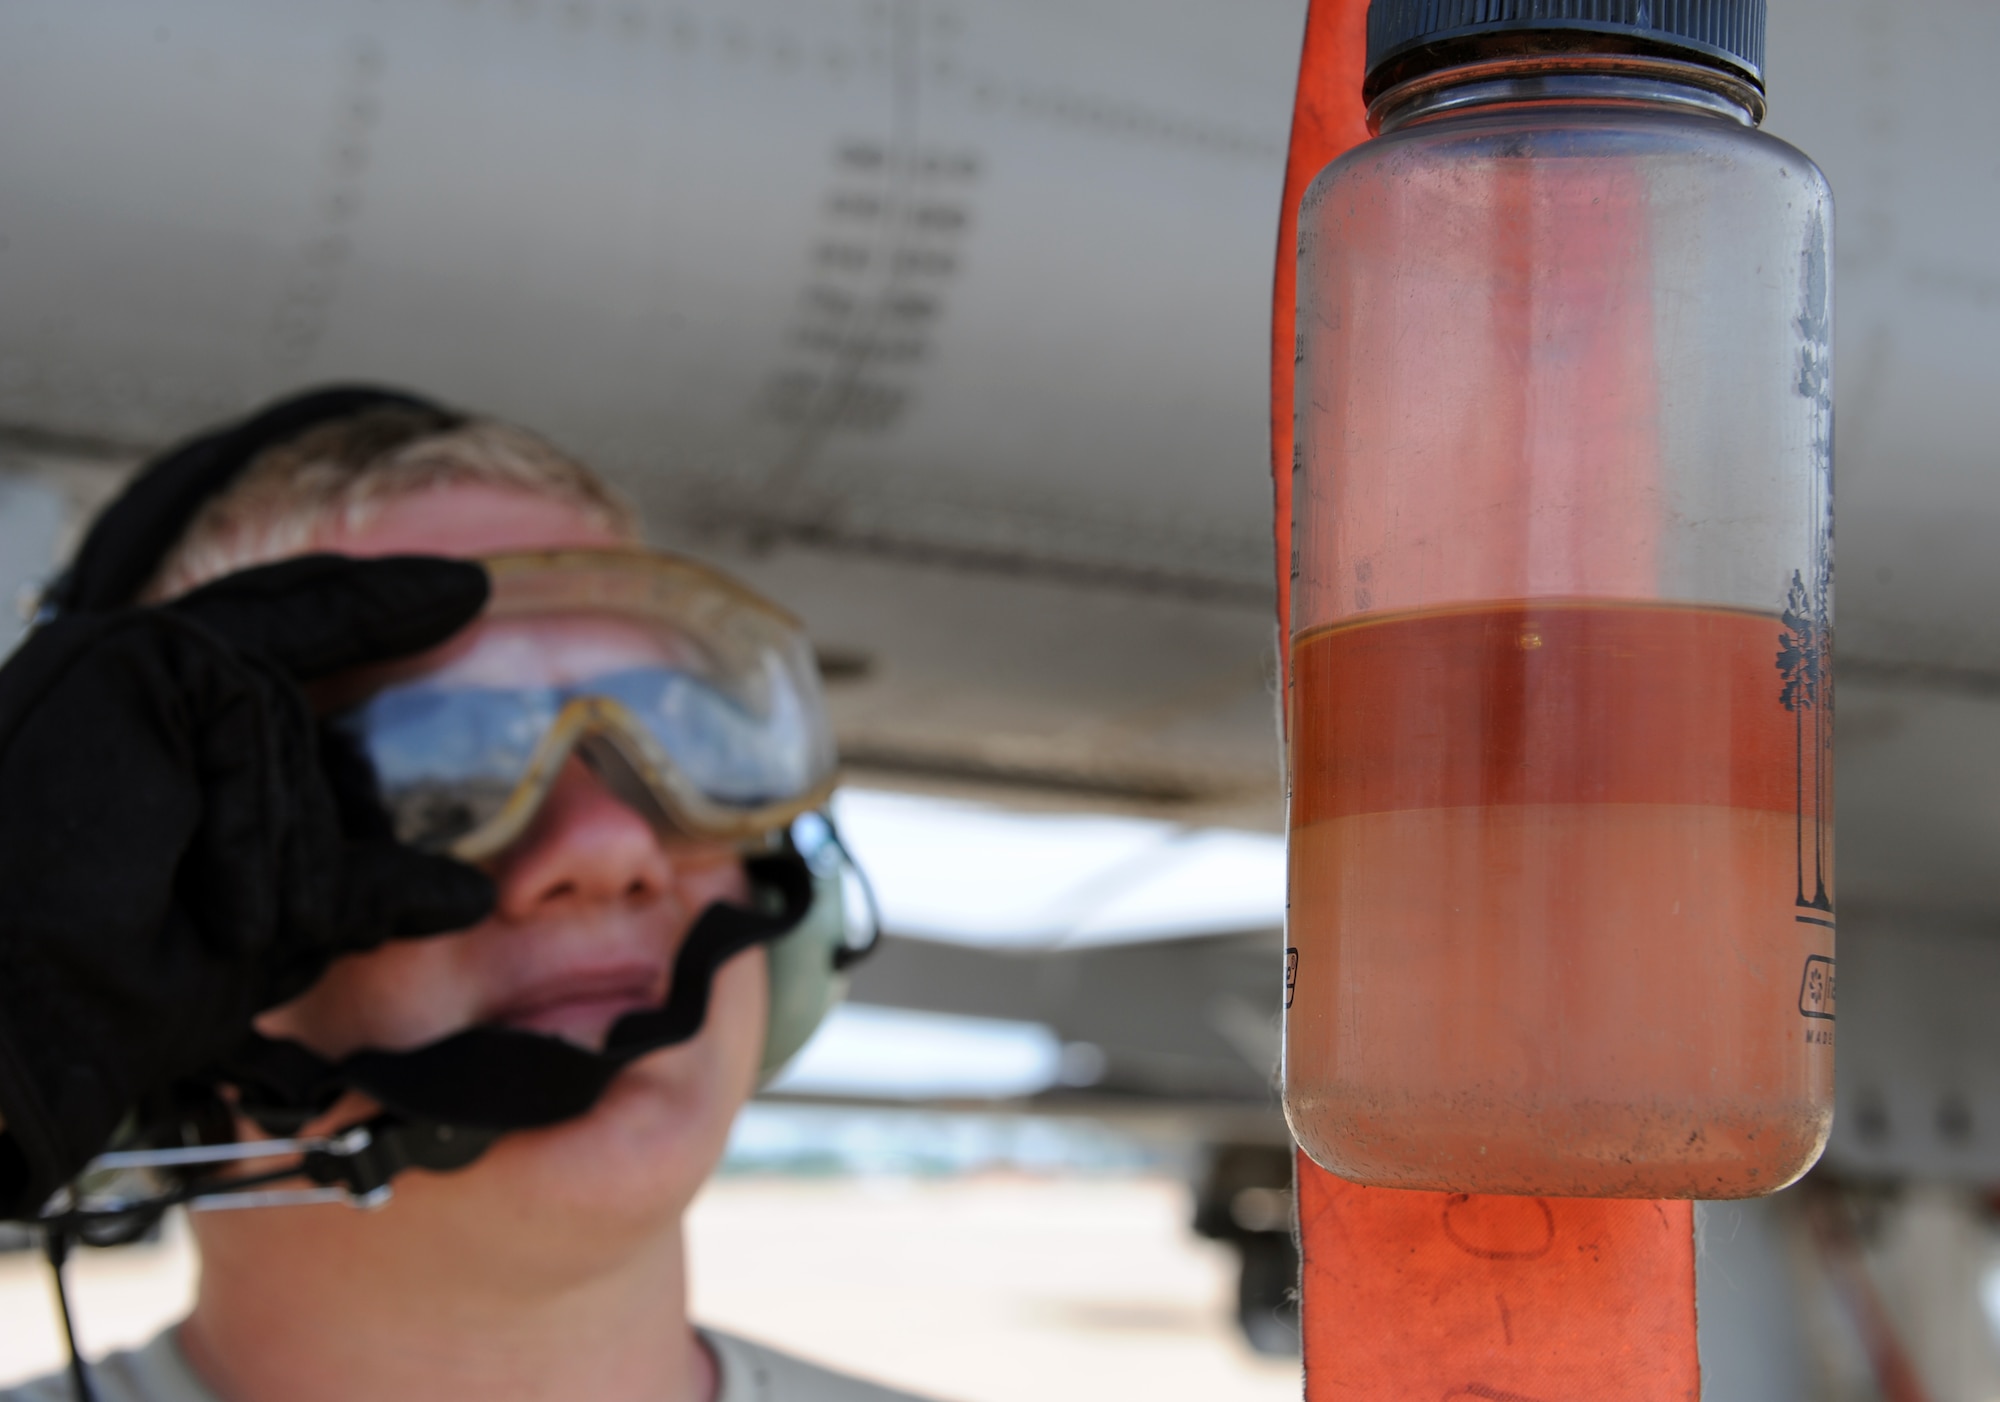 Airman 1st Class Steven Clennon, a crew chief from Moody Air Force Base, Ga., checks a bottle reclaiming fuel from an A-10 Thunderbolt II fighter on Barksdale Air Force Base, La., June 4, 2013. Airmen from Moody are participating in the exercise Green Flag East. The exercise trains Airmen from different career fields to work together and prepare for deployments to combat environments. (U.S. Air Force photo/Airman 1st Class Benjamin Gonsier)
